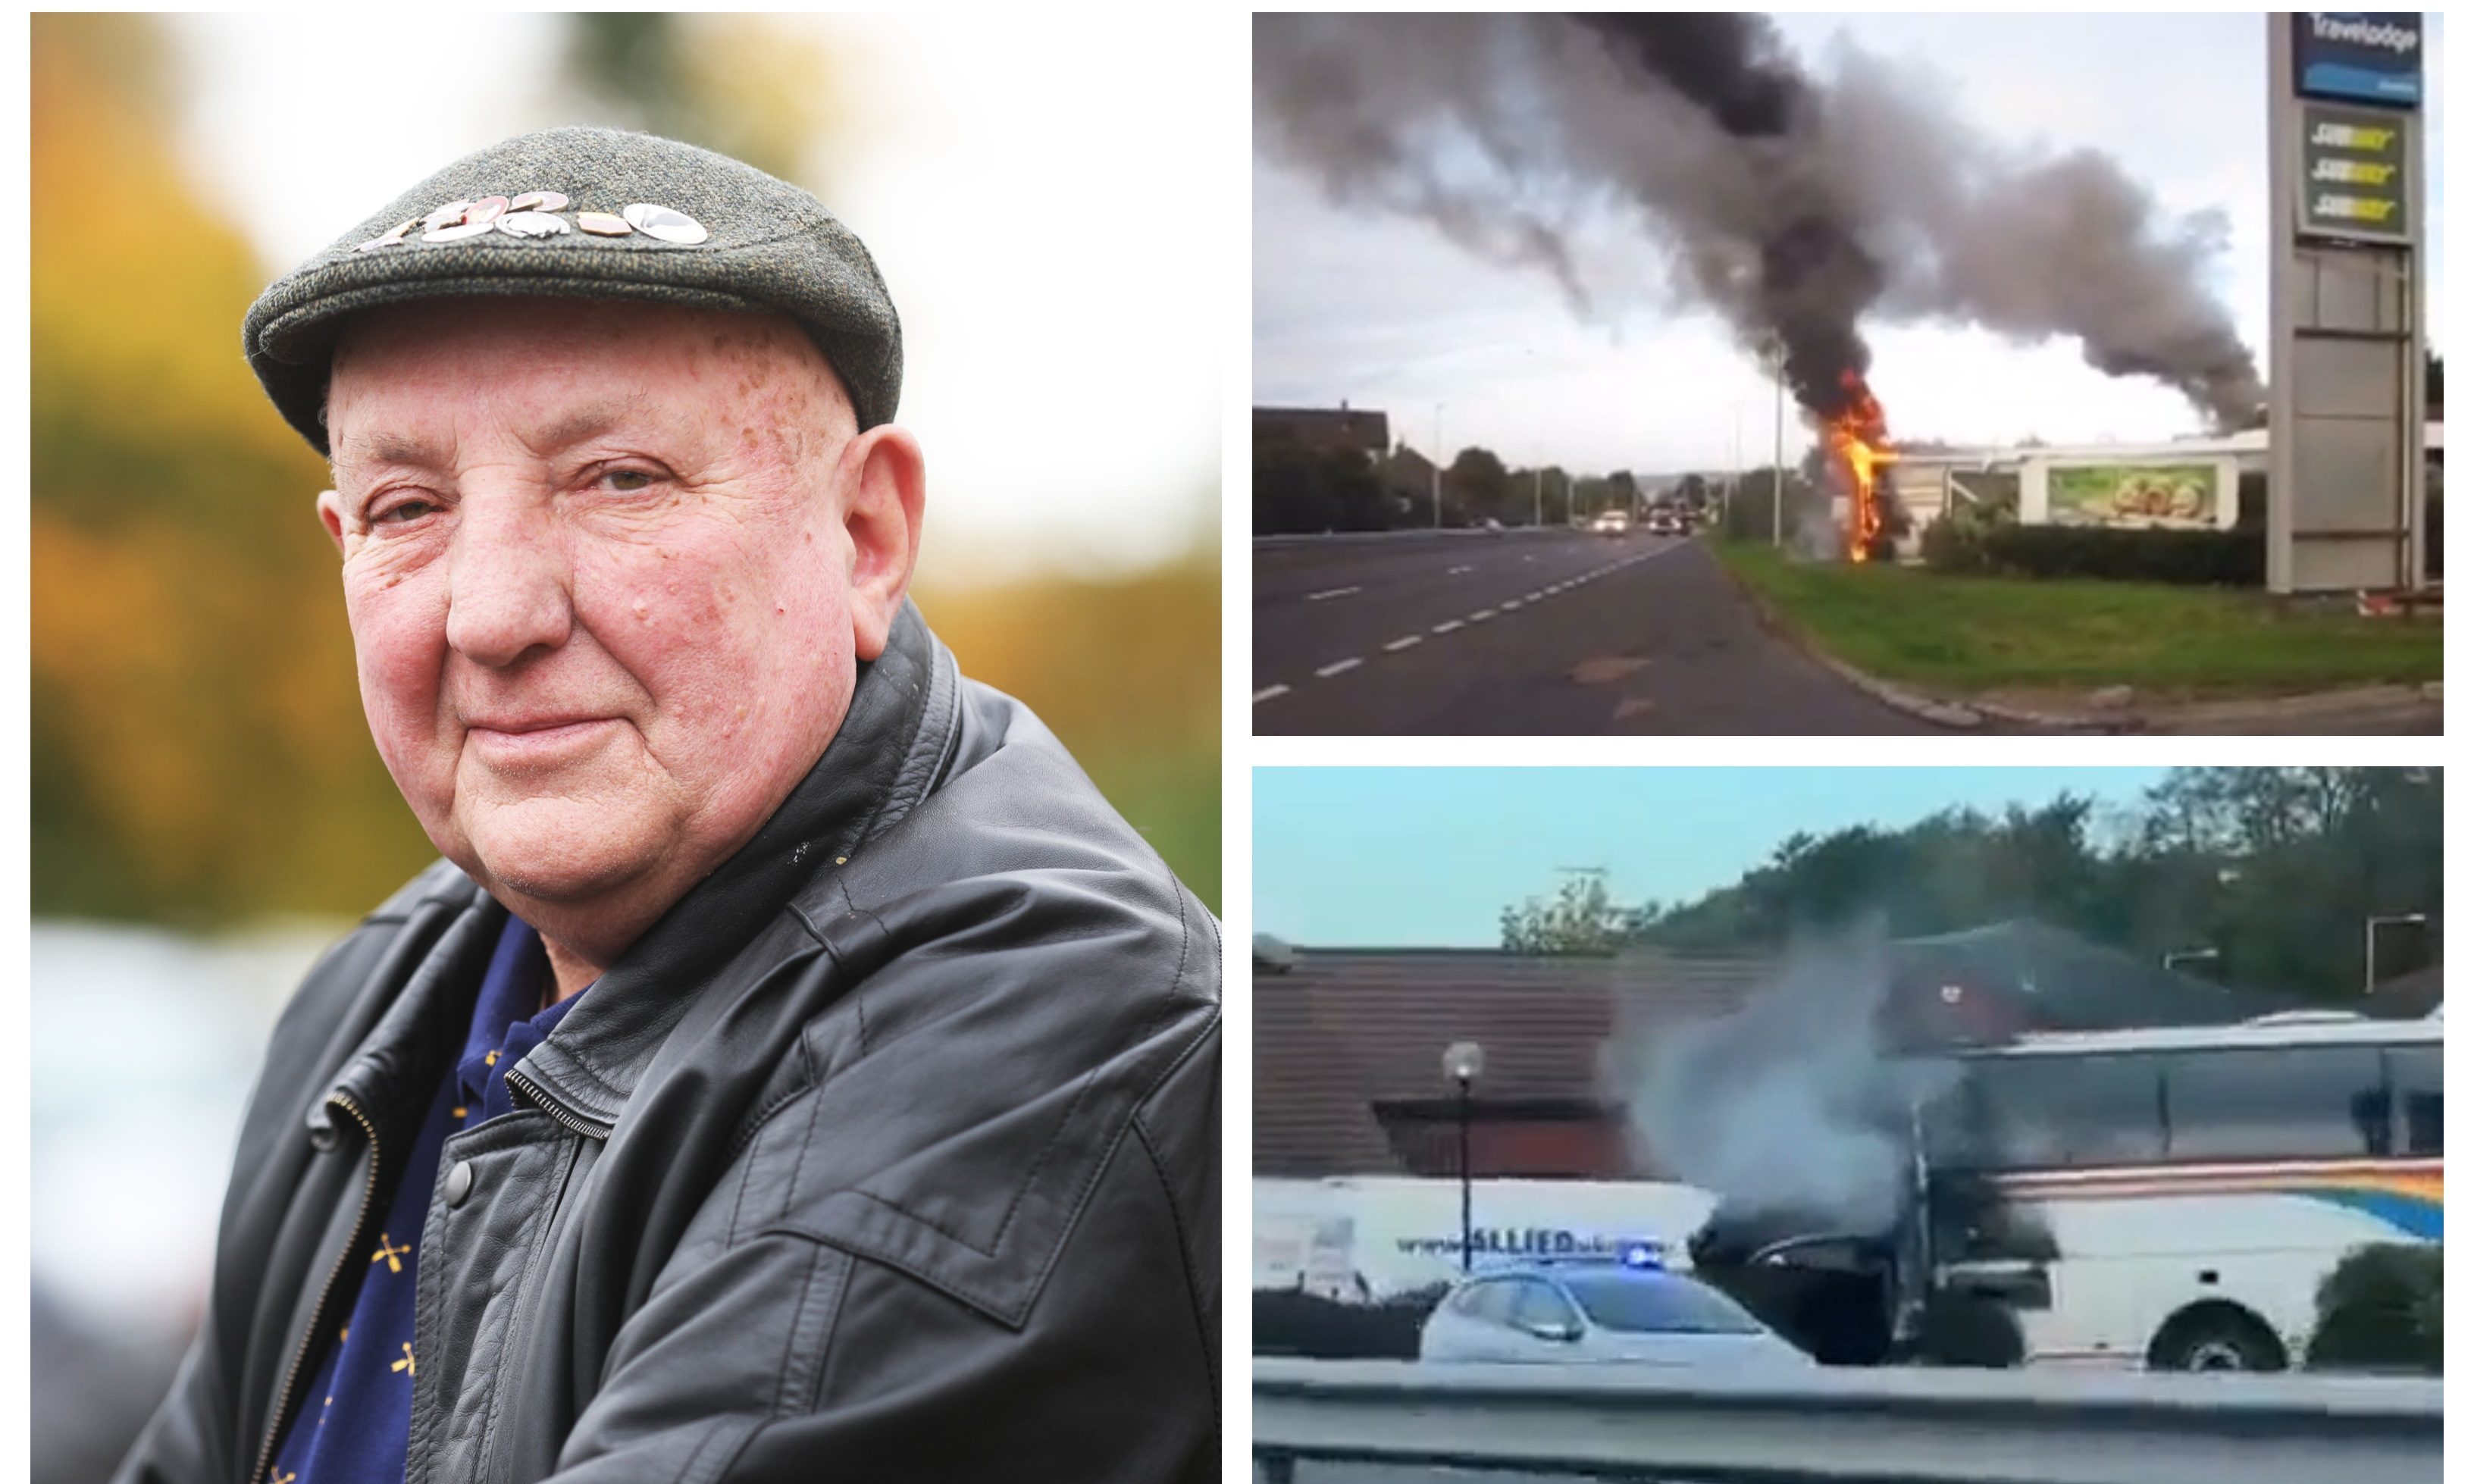 Archie Harper, 73, raised the alarm after a bus caught on fire in Dundee.